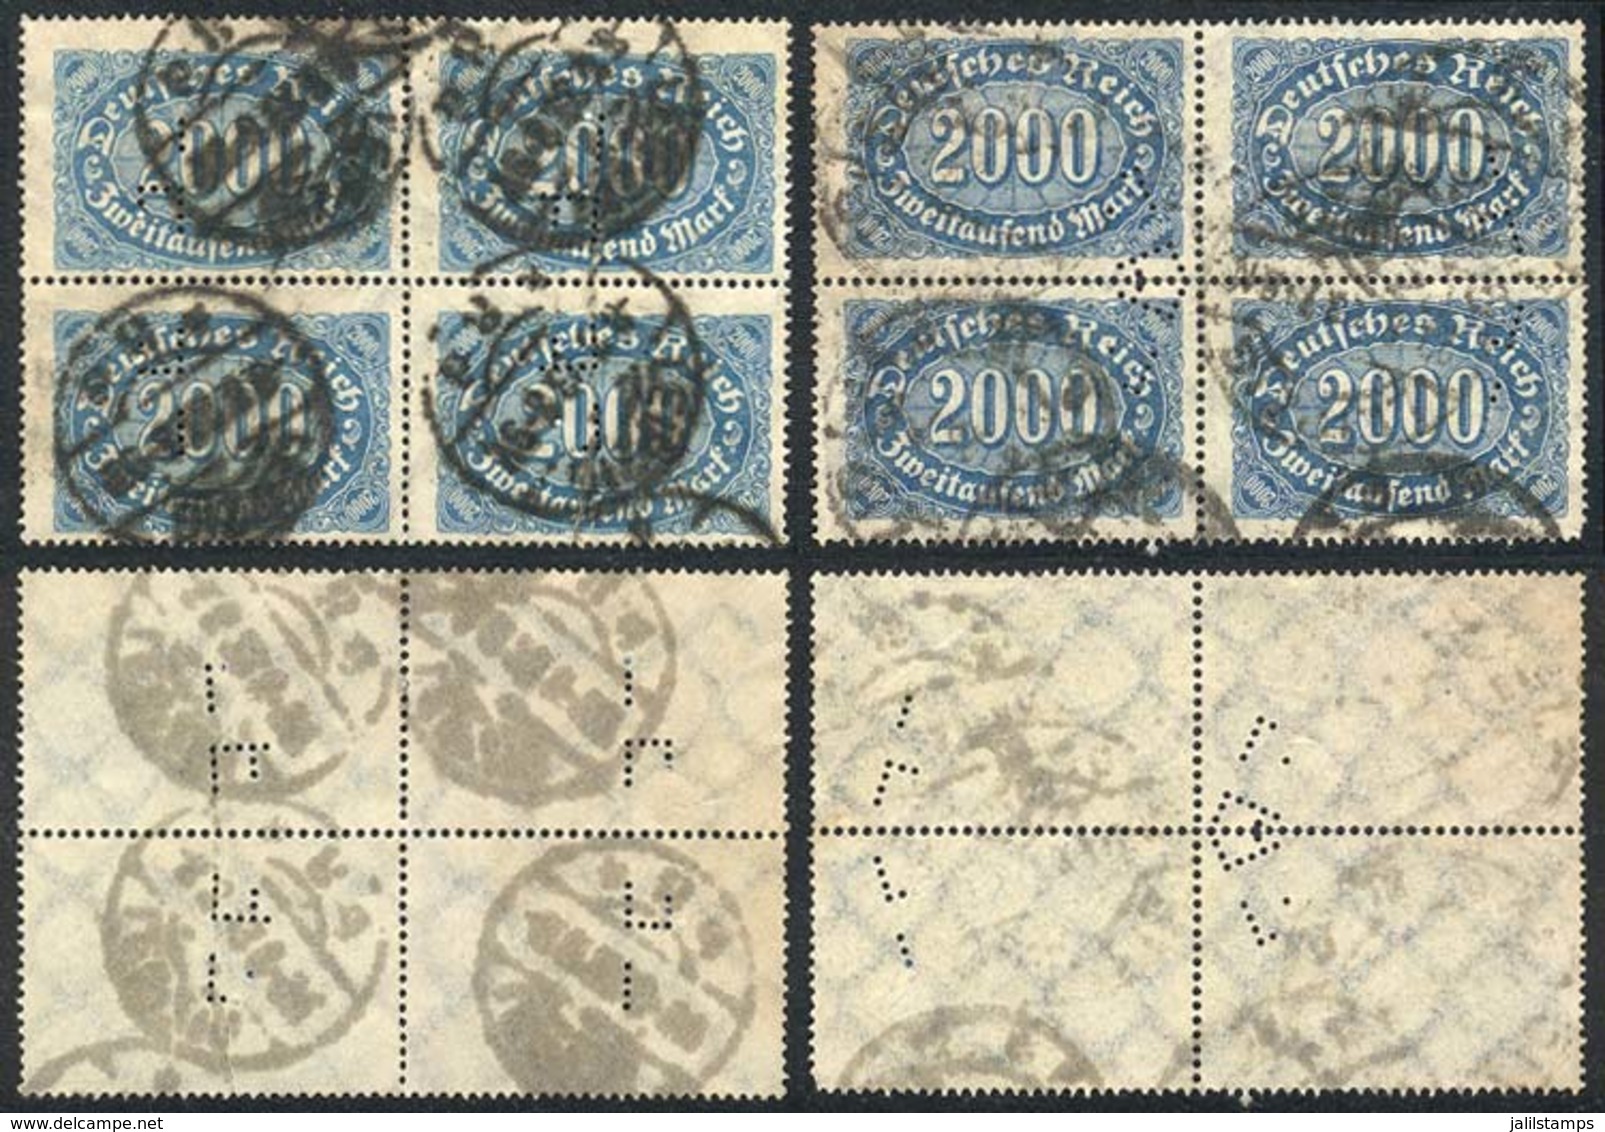 GERMANY: Michel 253a + 253b, Blocks Of 4 With Nice PERFINS, Fine Quality! - Unused Stamps